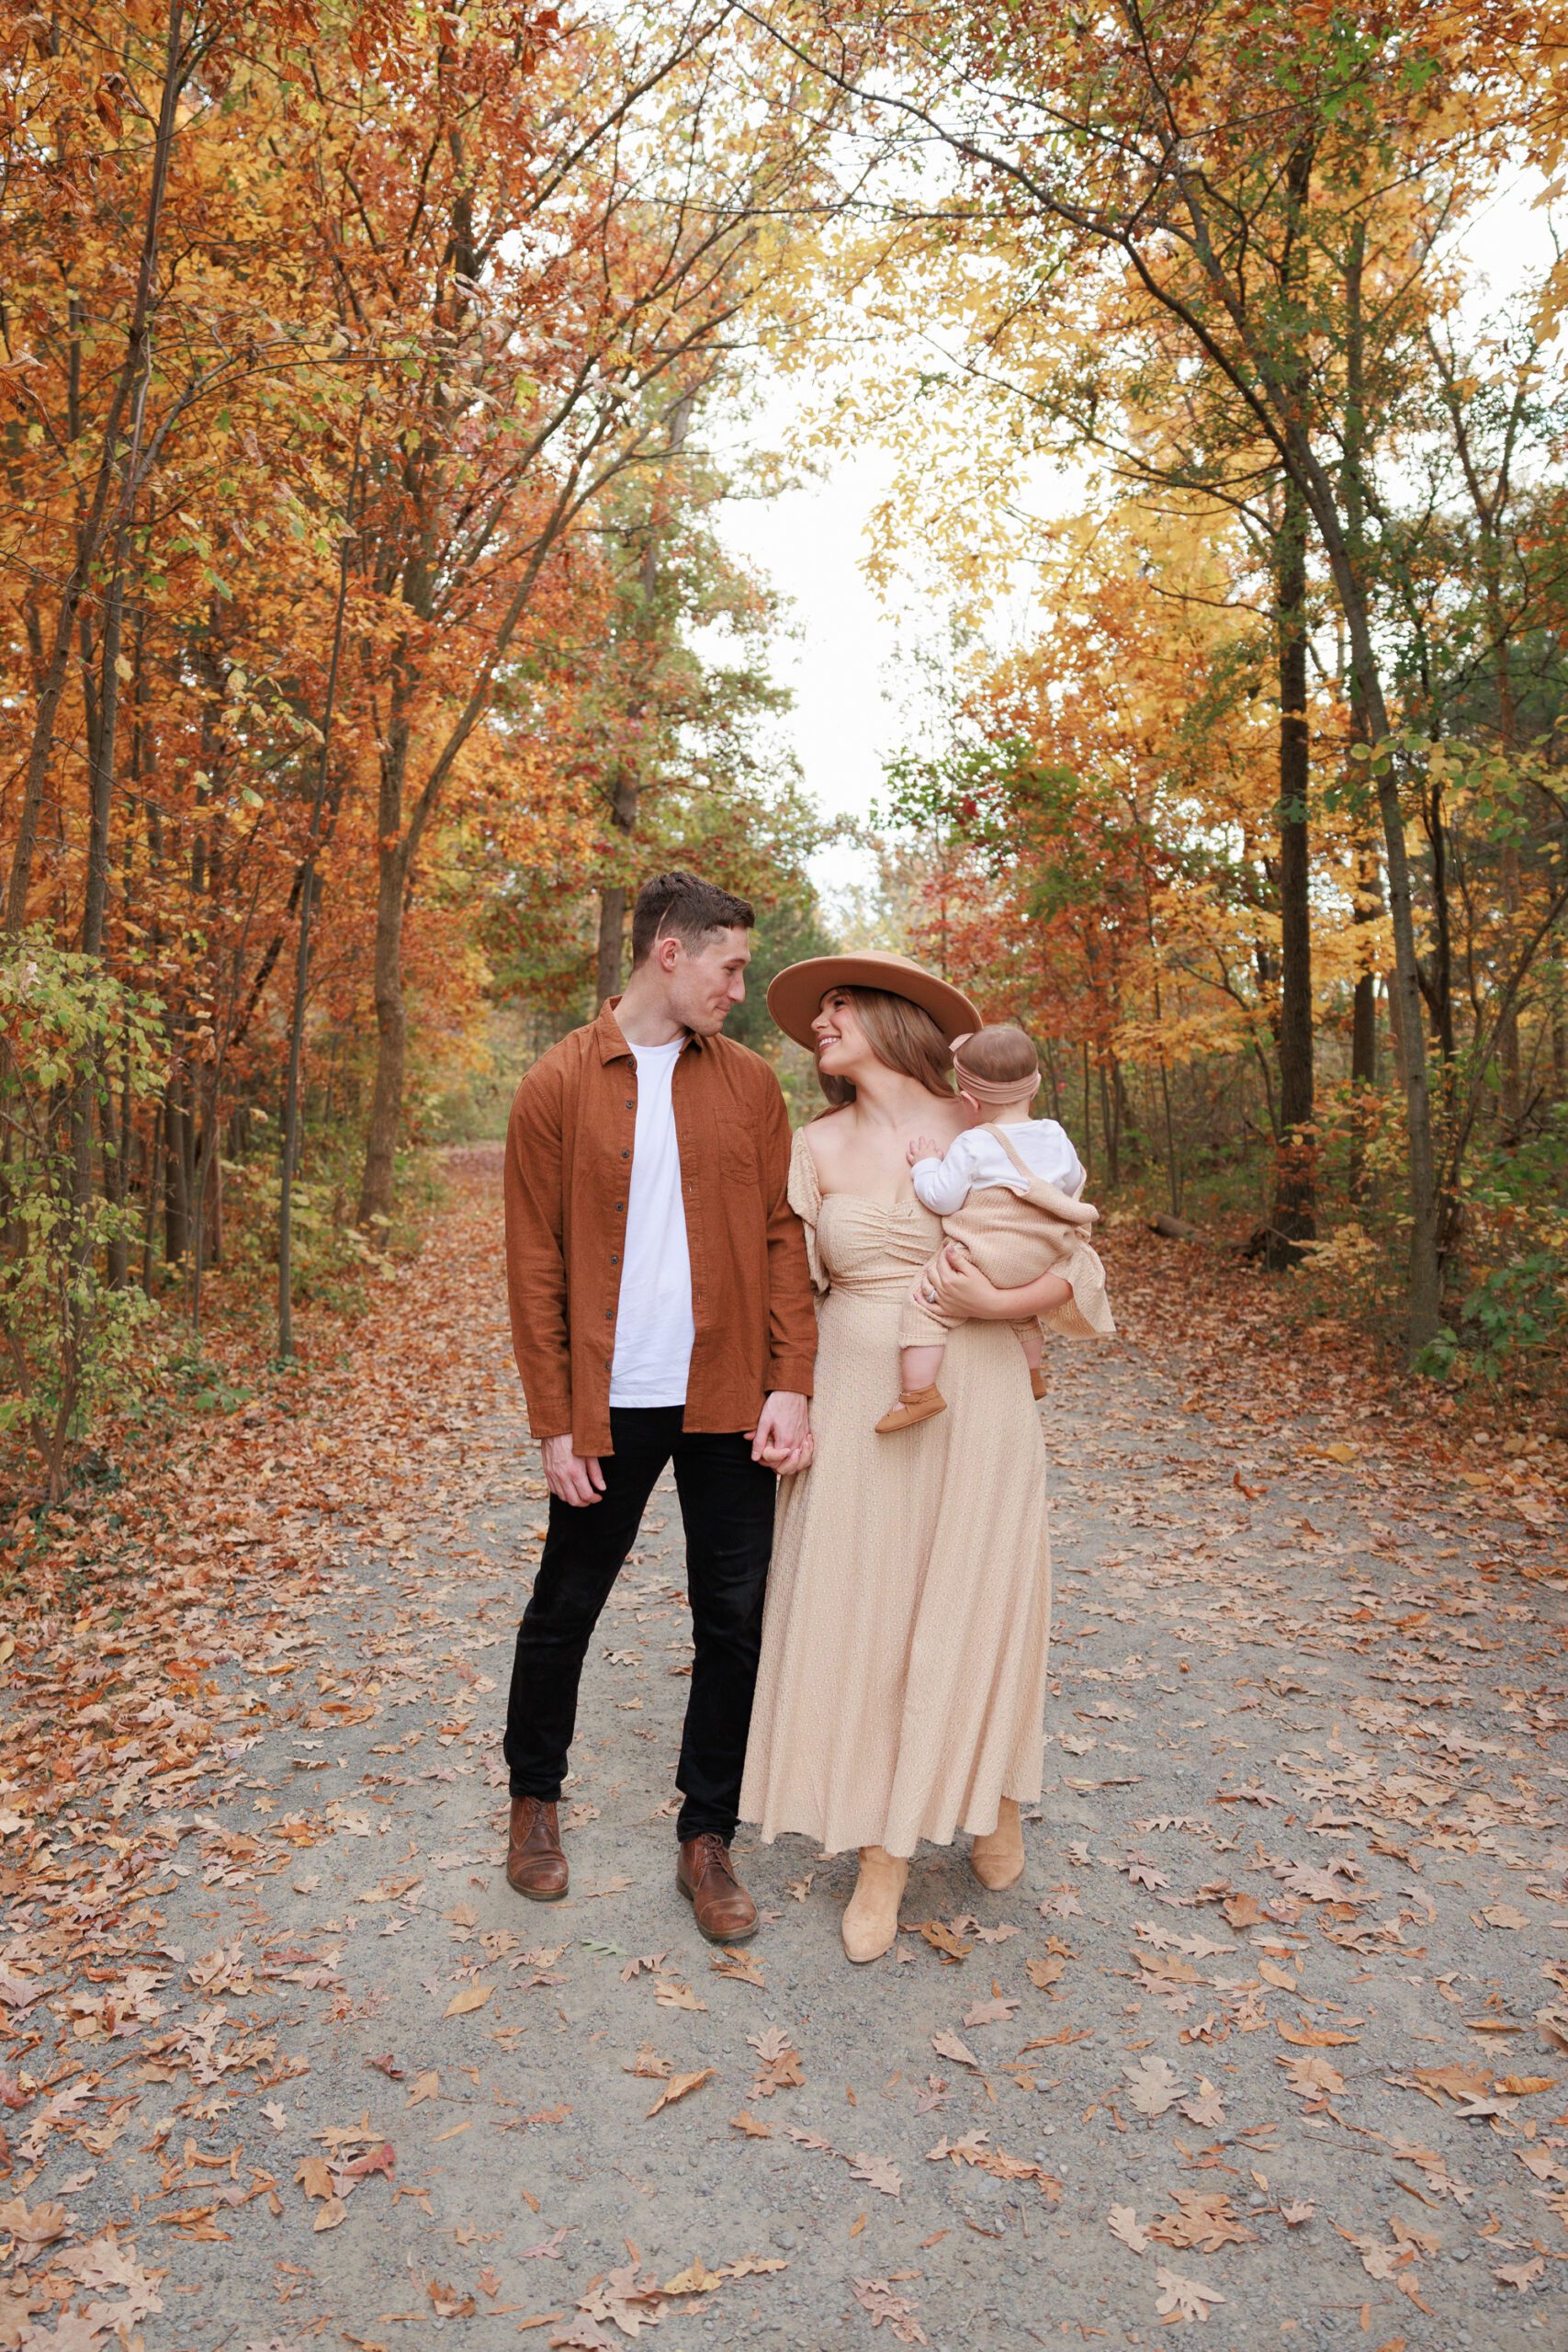 Mom, dad, and baby looking cute together in their neutral outfits that blend in with the autumn foliage.